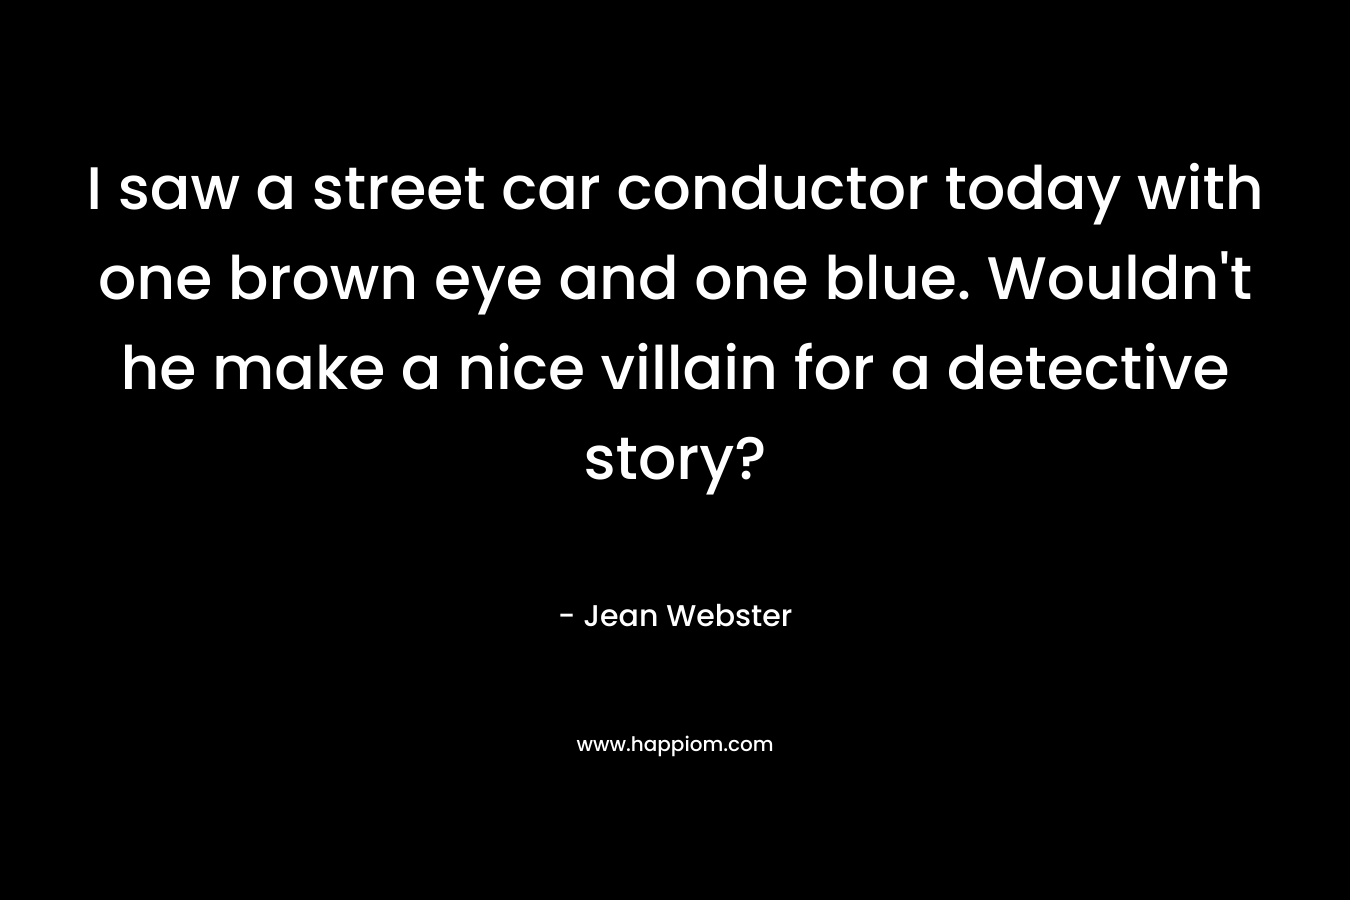 I saw a street car conductor today with one brown eye and one blue. Wouldn’t he make a nice villain for a detective story? – Jean Webster